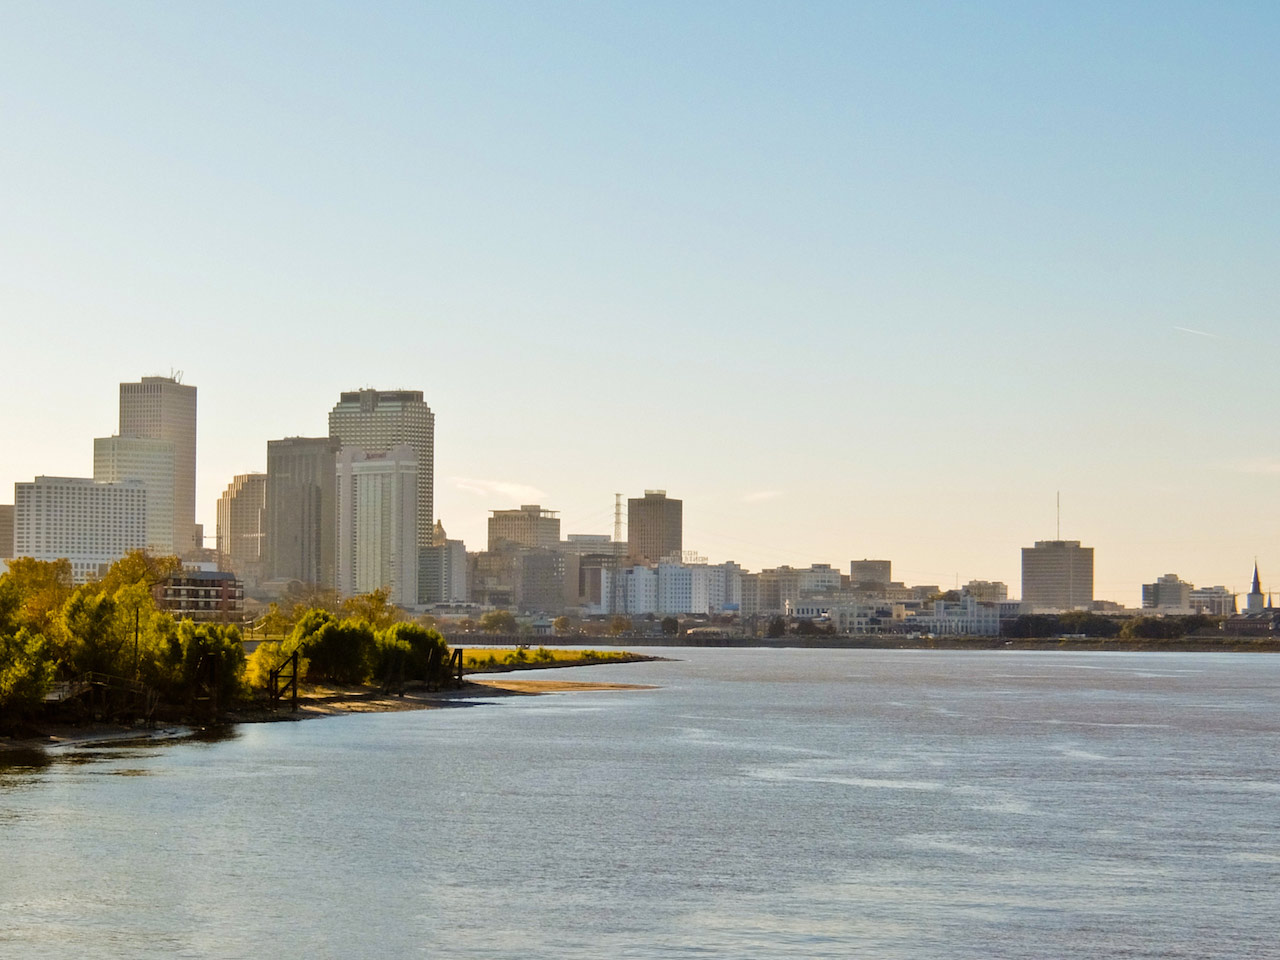 Experiencing New Orleans, Louisiana’s Heritage, Culture, Jazz, and Delicious Cuisine for 5 Days.